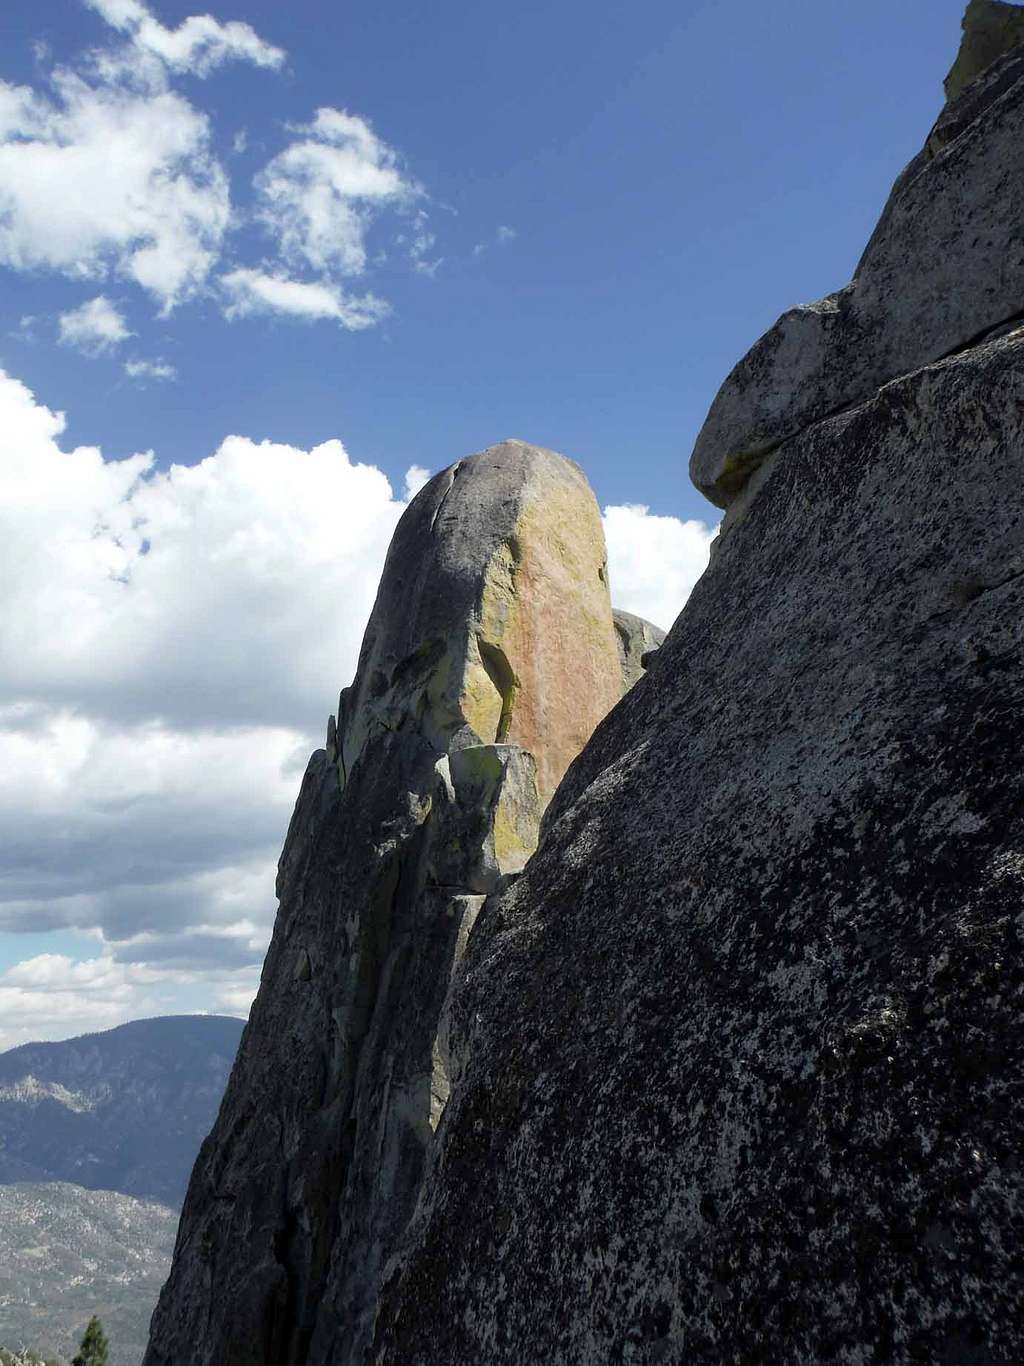 Witch Doctor, 5.10c, 3 Pitches, The Witch, Needles, June, 2020